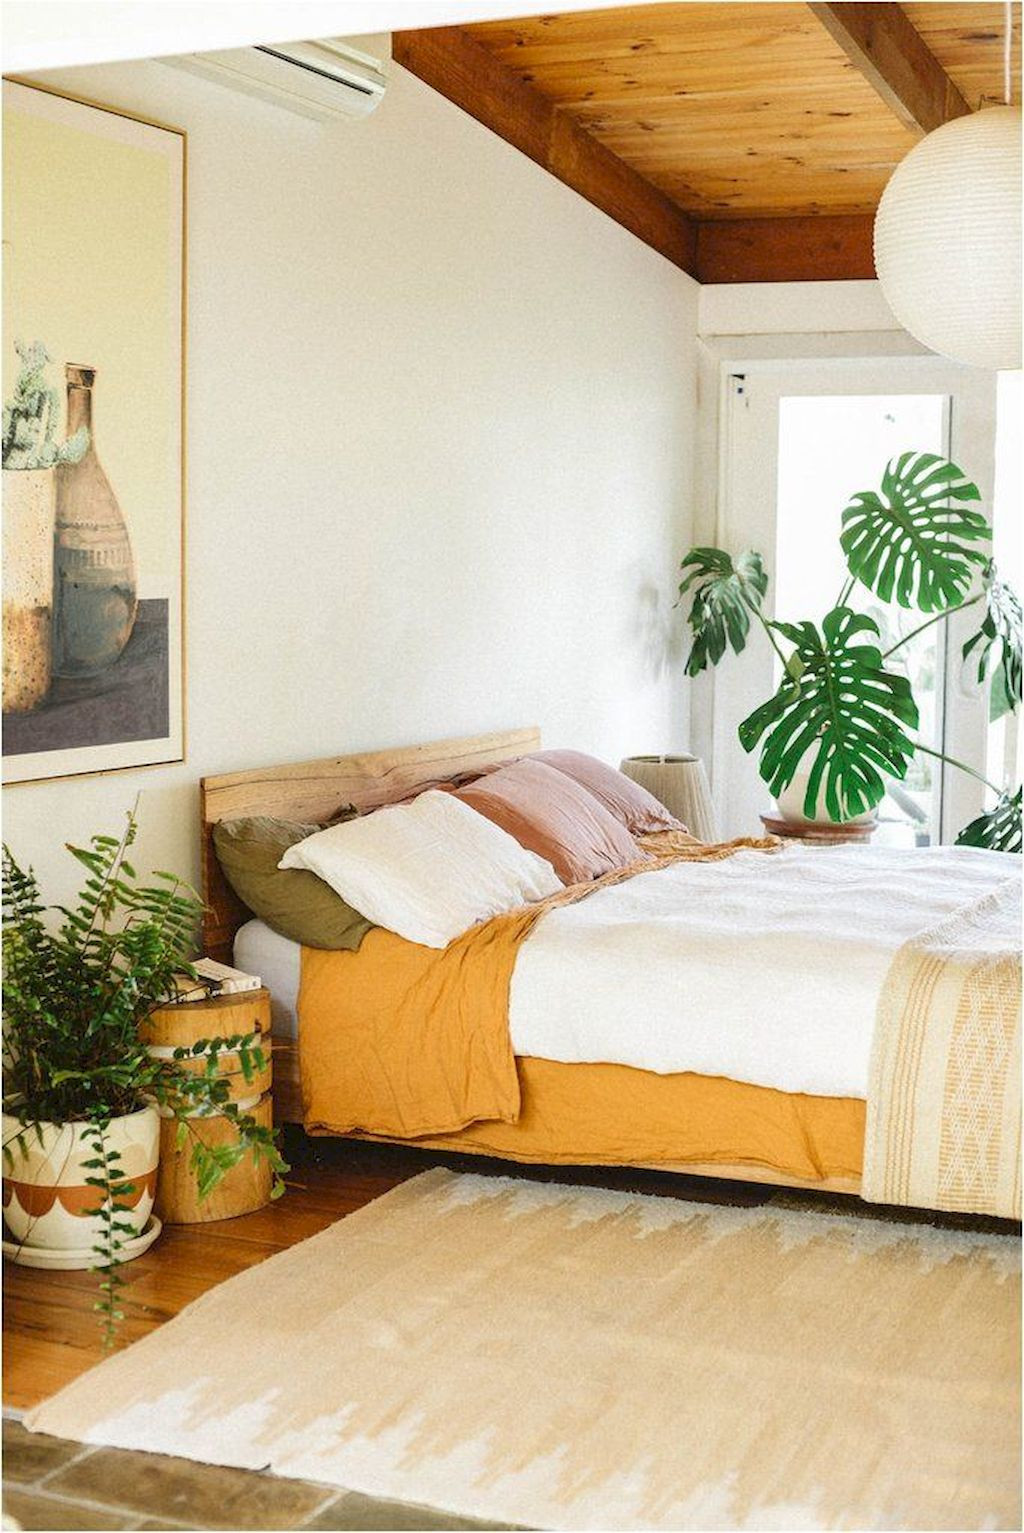 Relaxing Bedroom Decor
 Relaxing Bedroom Designs with Natural Decorations